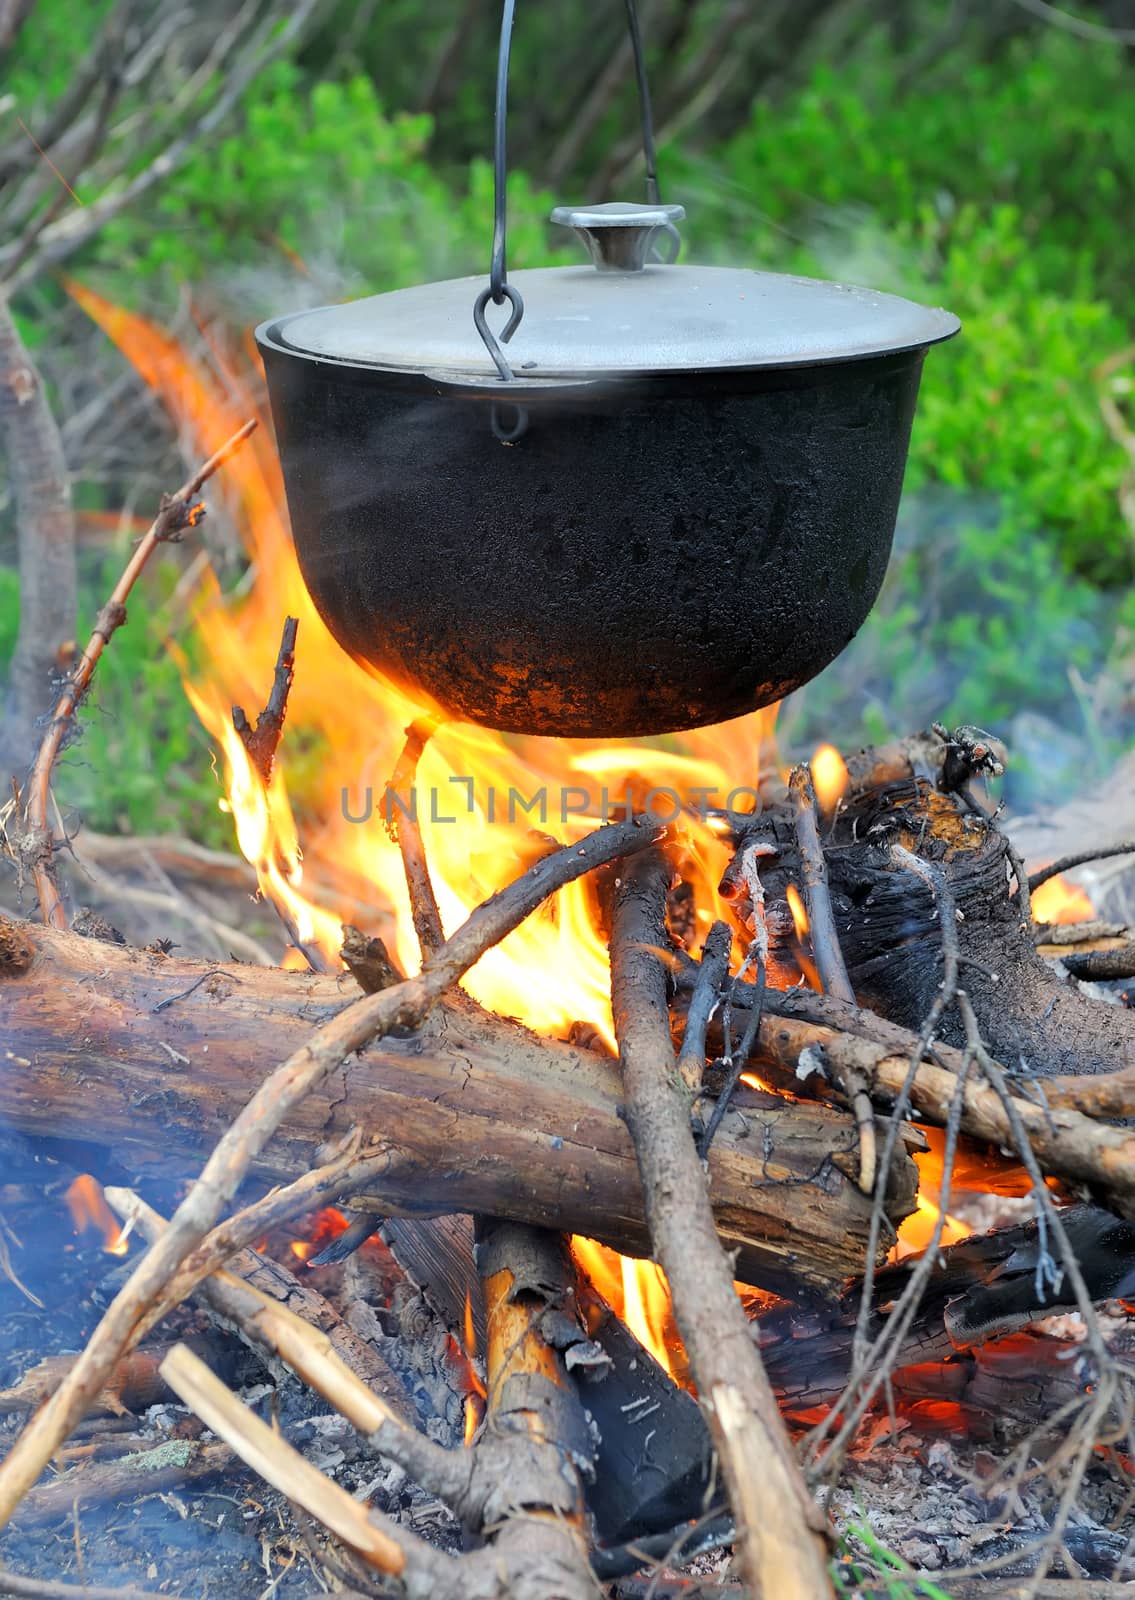 Cooking in the nature. Cauldron on fire in forest